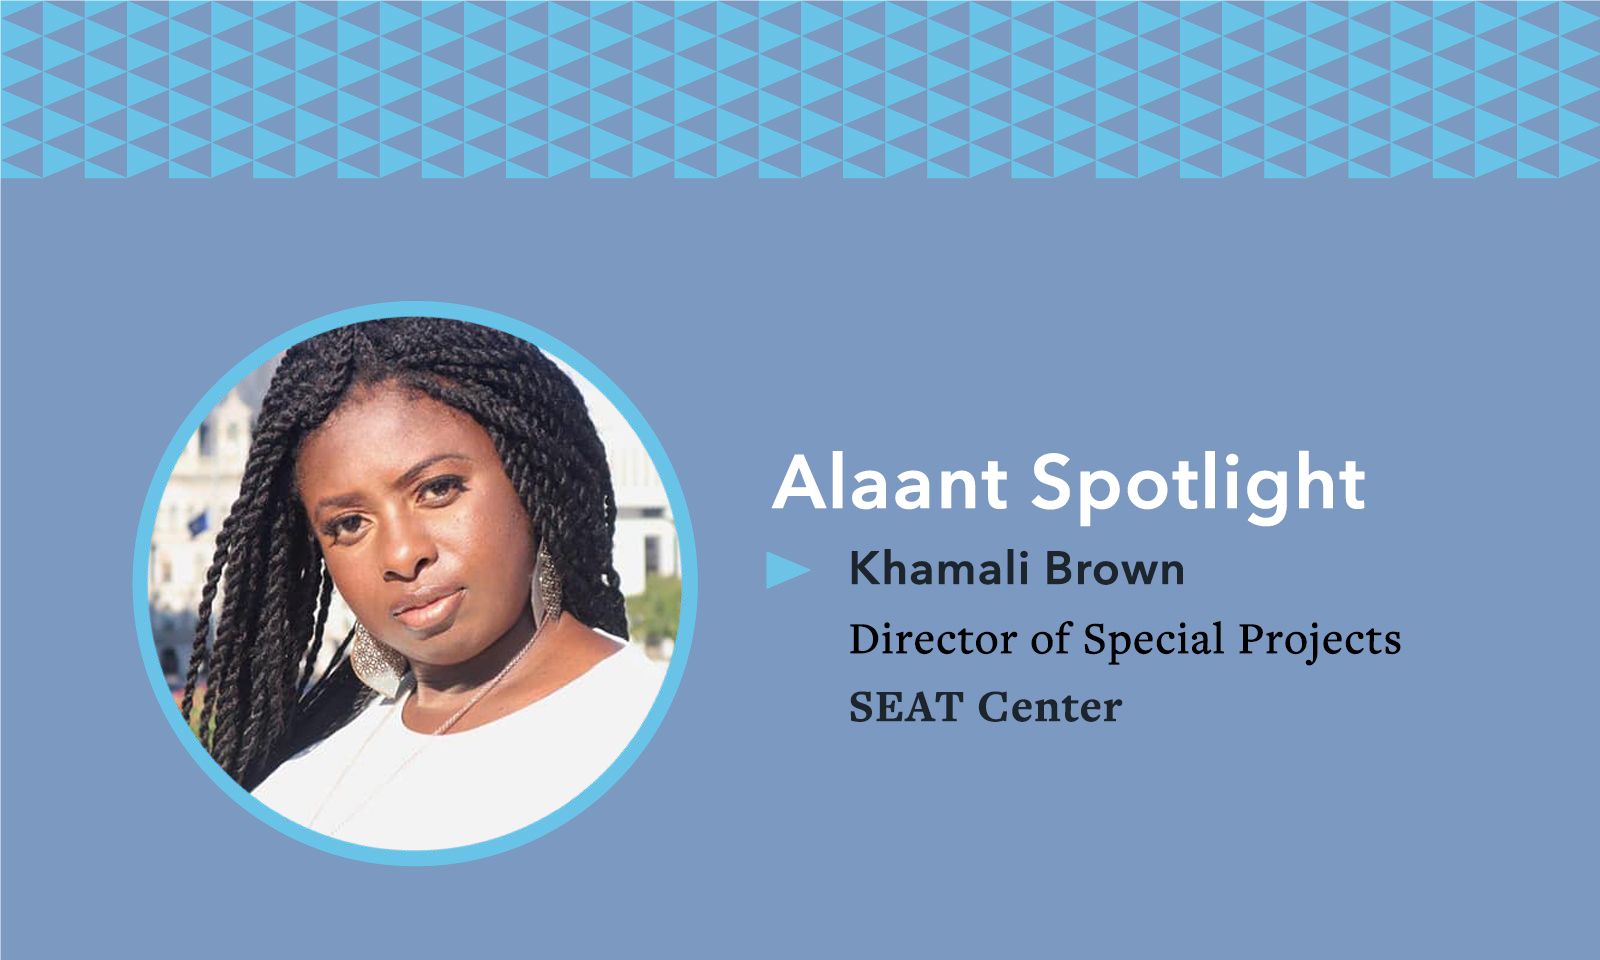 Alaant Spotlight: Khamali Brown, Director of Special Projects, SEAT Center